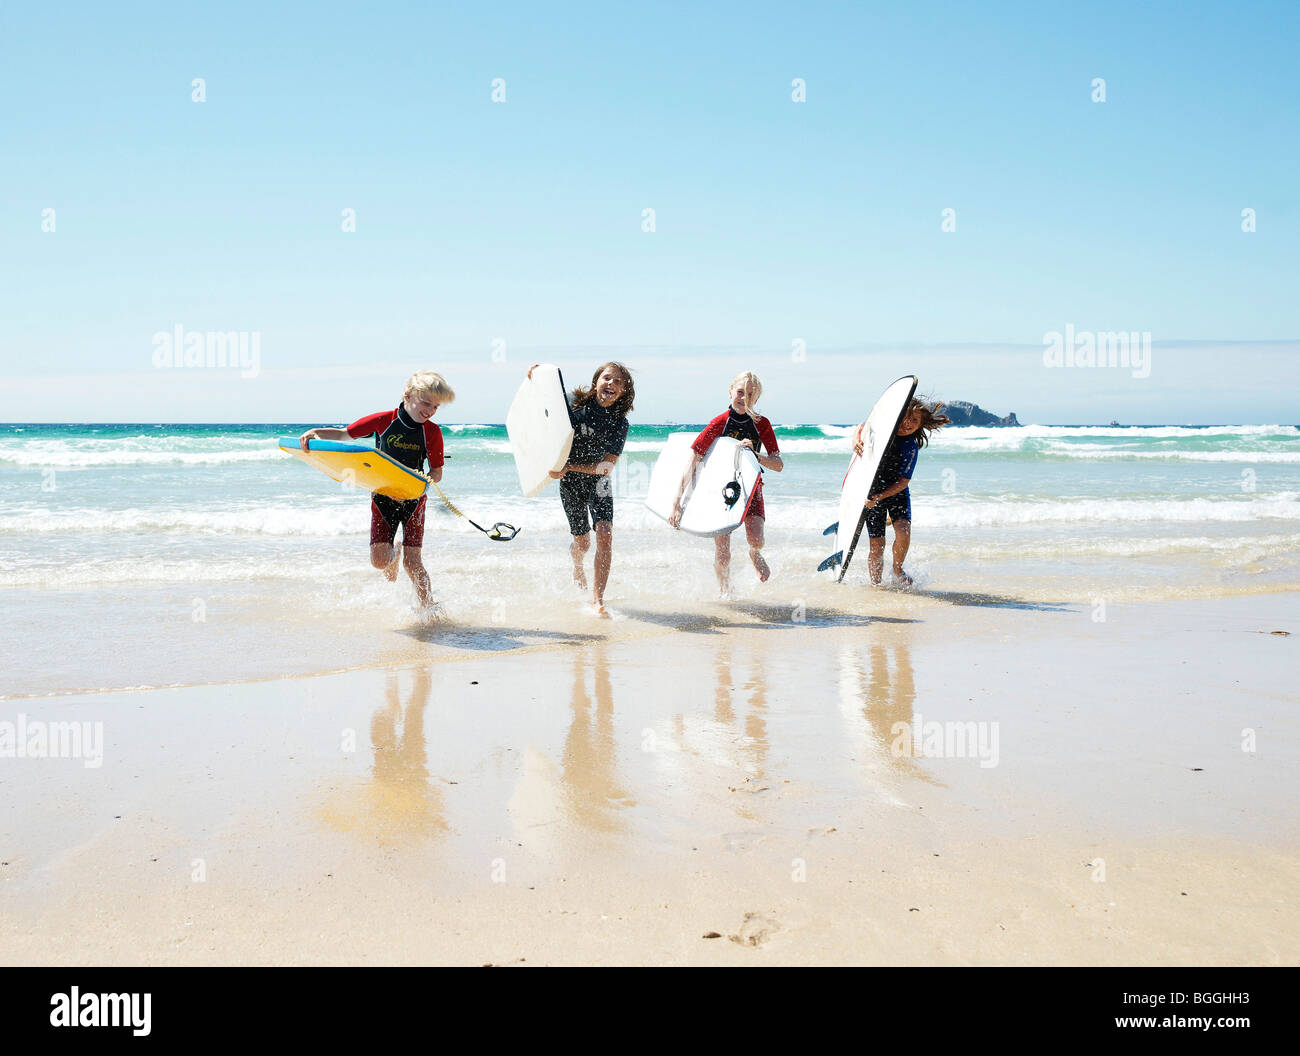 Children with surfboards running out of the water, front view Stock Photo